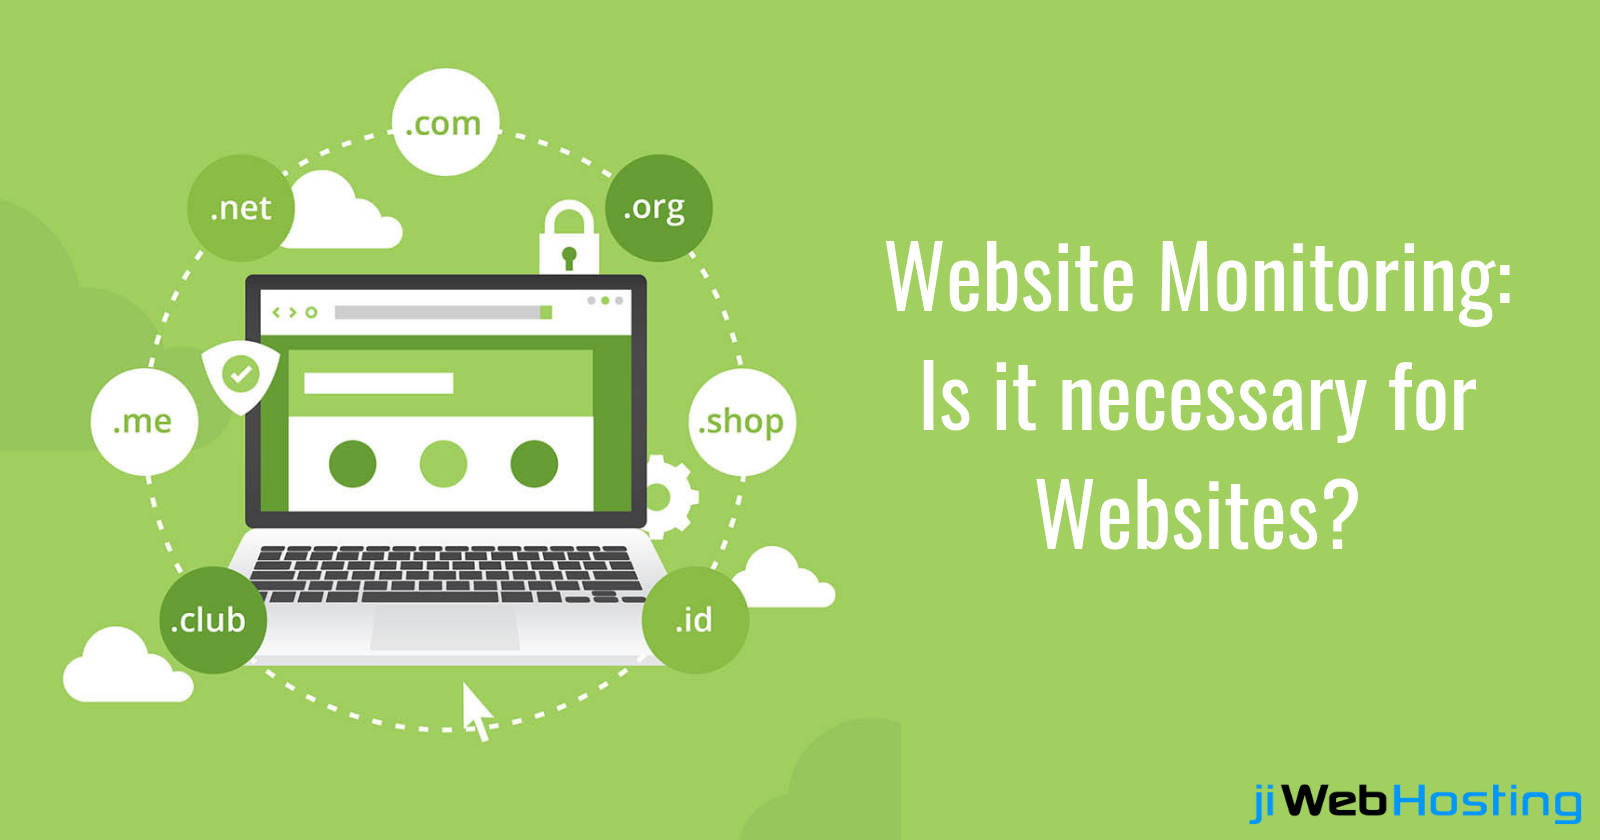 Top Reasons Why Website Monitoring is Necessary for Websites